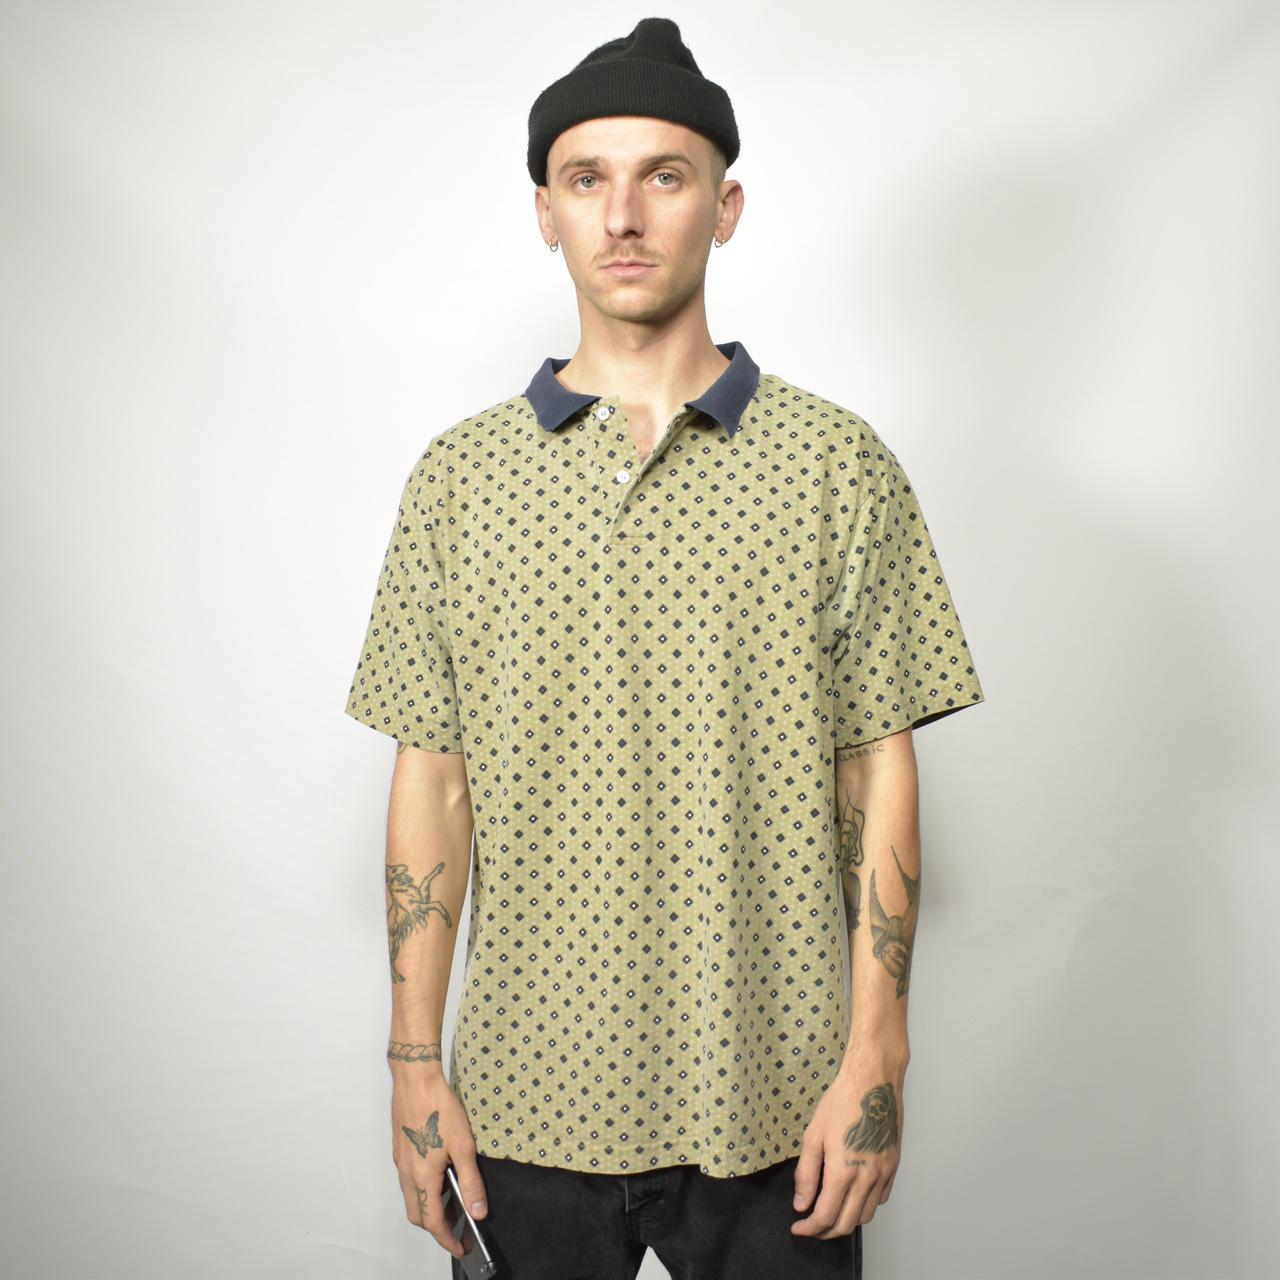 Product Image 1 - Vintage Honors Patterned Polo Shirt
-Slight